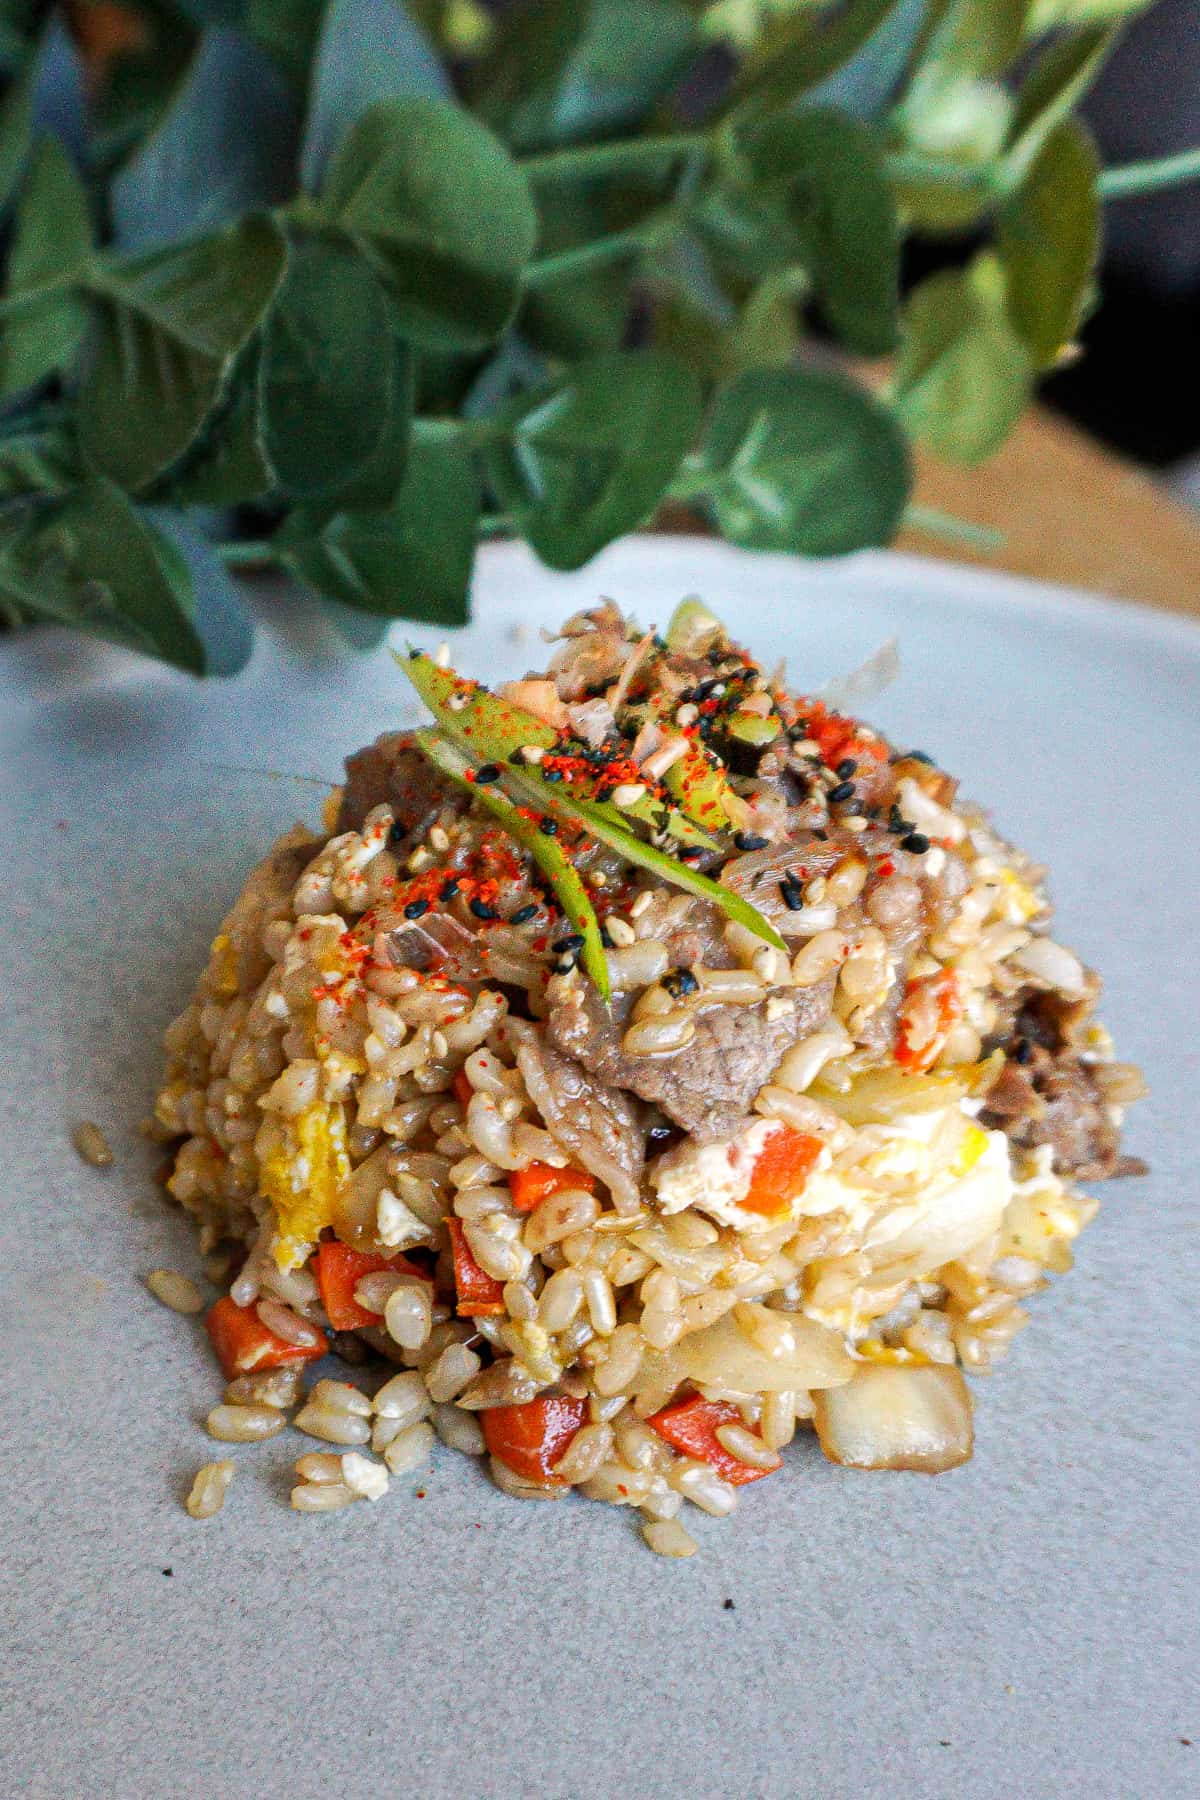 A serving of sukiyaki fried rice topped with scallions.